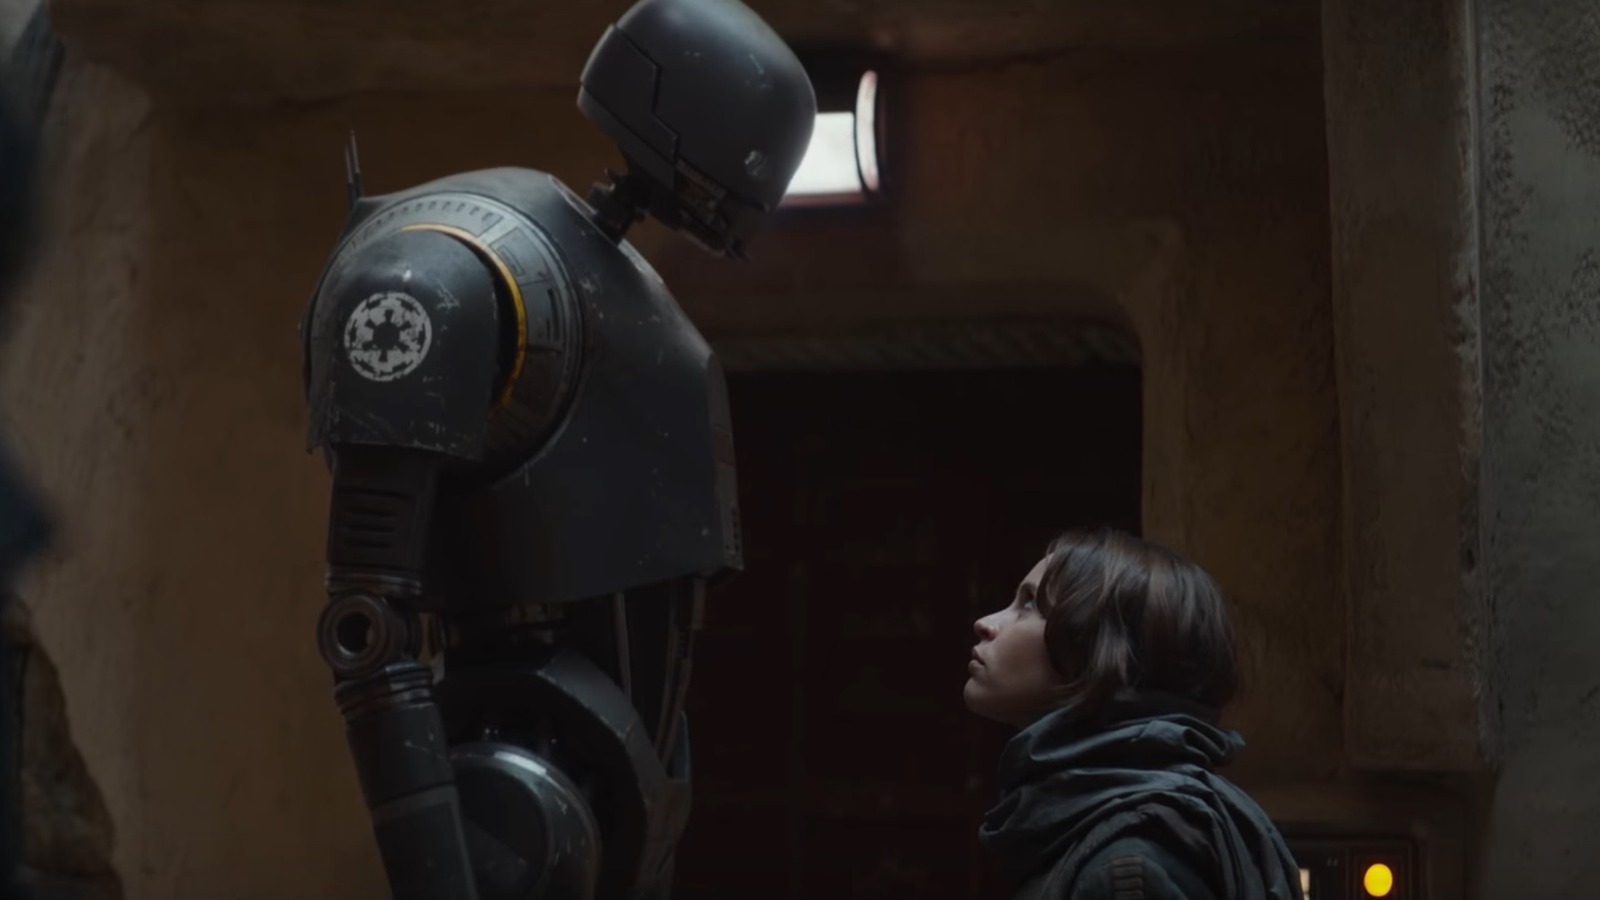 Rogue One Writers Gary Whitta And Chris Weitz Reveal Their Idea For An Unmade Star Wars TV Show